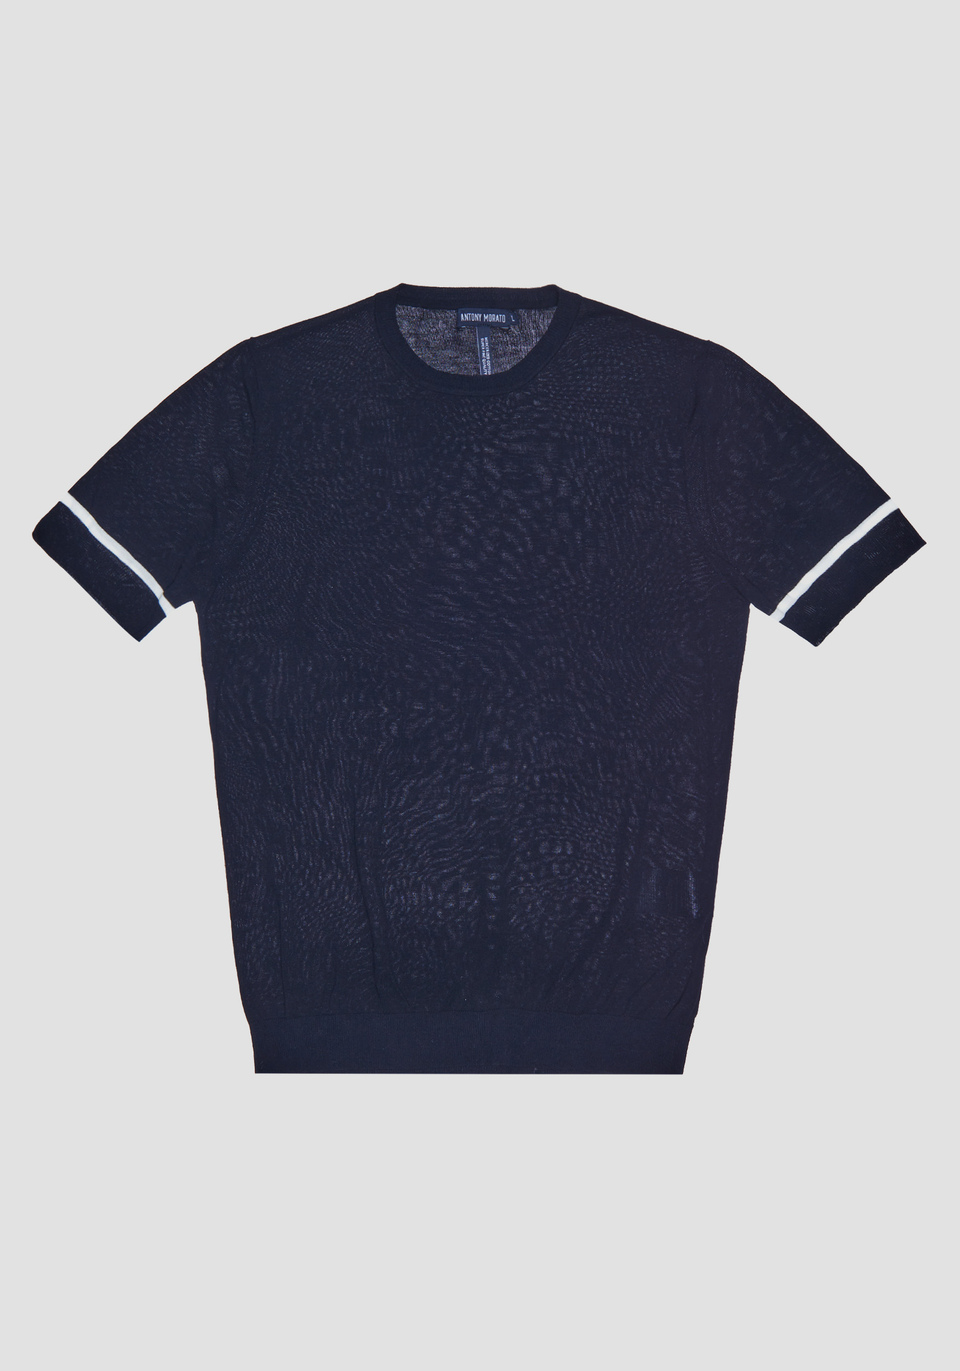 SLIM FIT FULL-FASHIONED KNIT SWEATER WITH CONTRASTING JACQUARD BAND - Antony Morato Online Shop